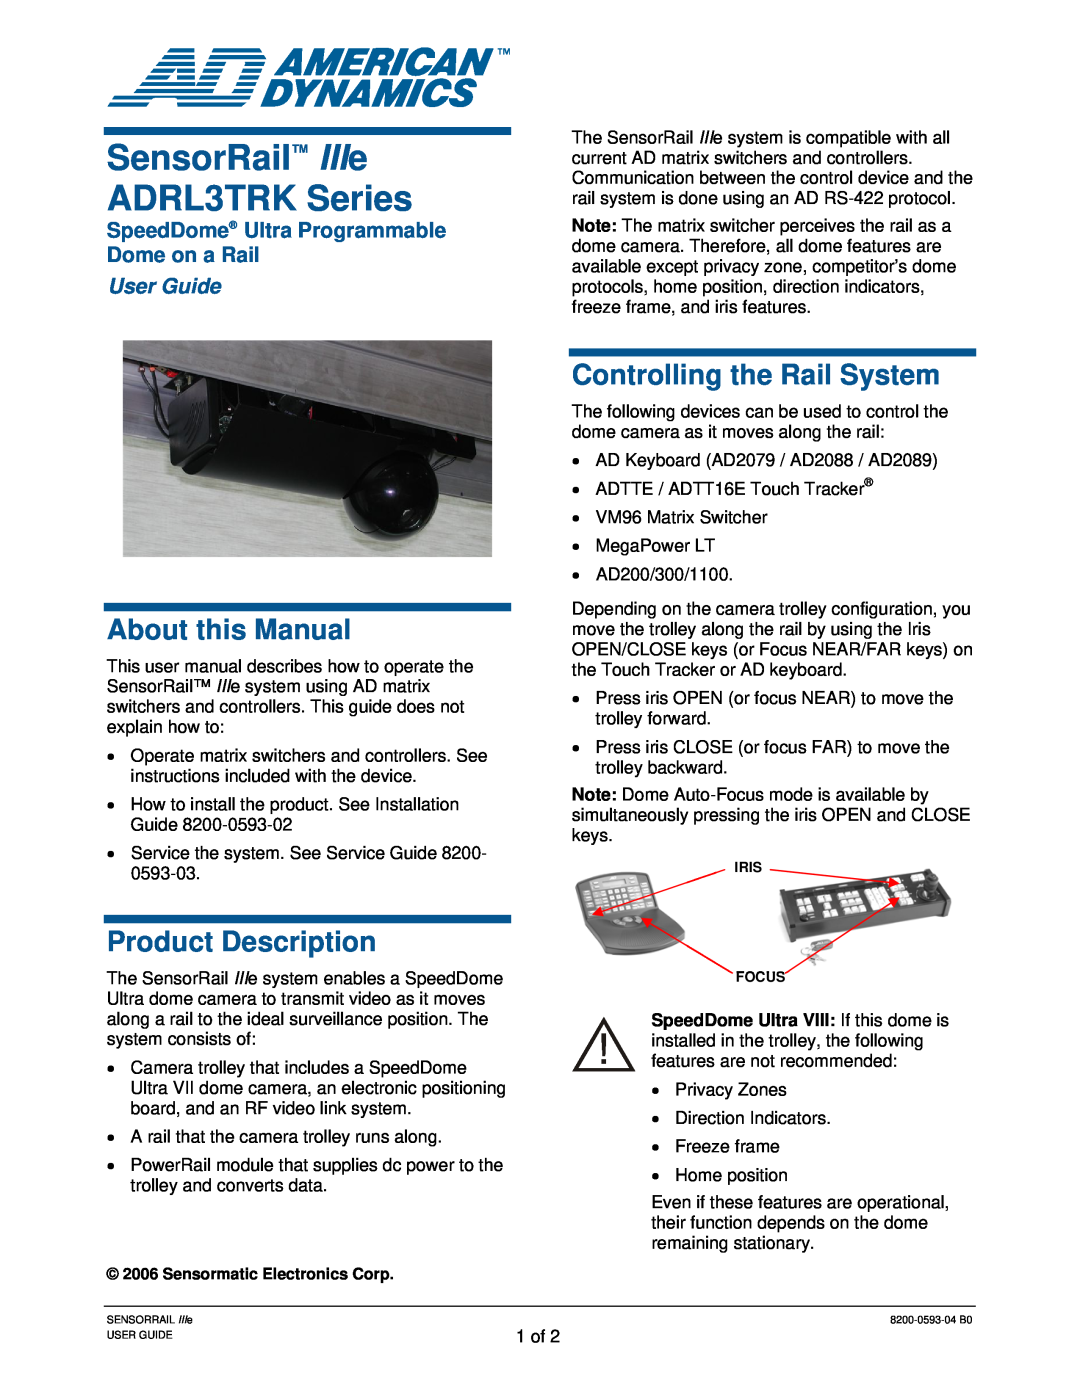 American Dynamics AD300, AD200 user manual SensorRail IIIe ADRL3TRK Series, Controlling the Rail System, About this Manual 